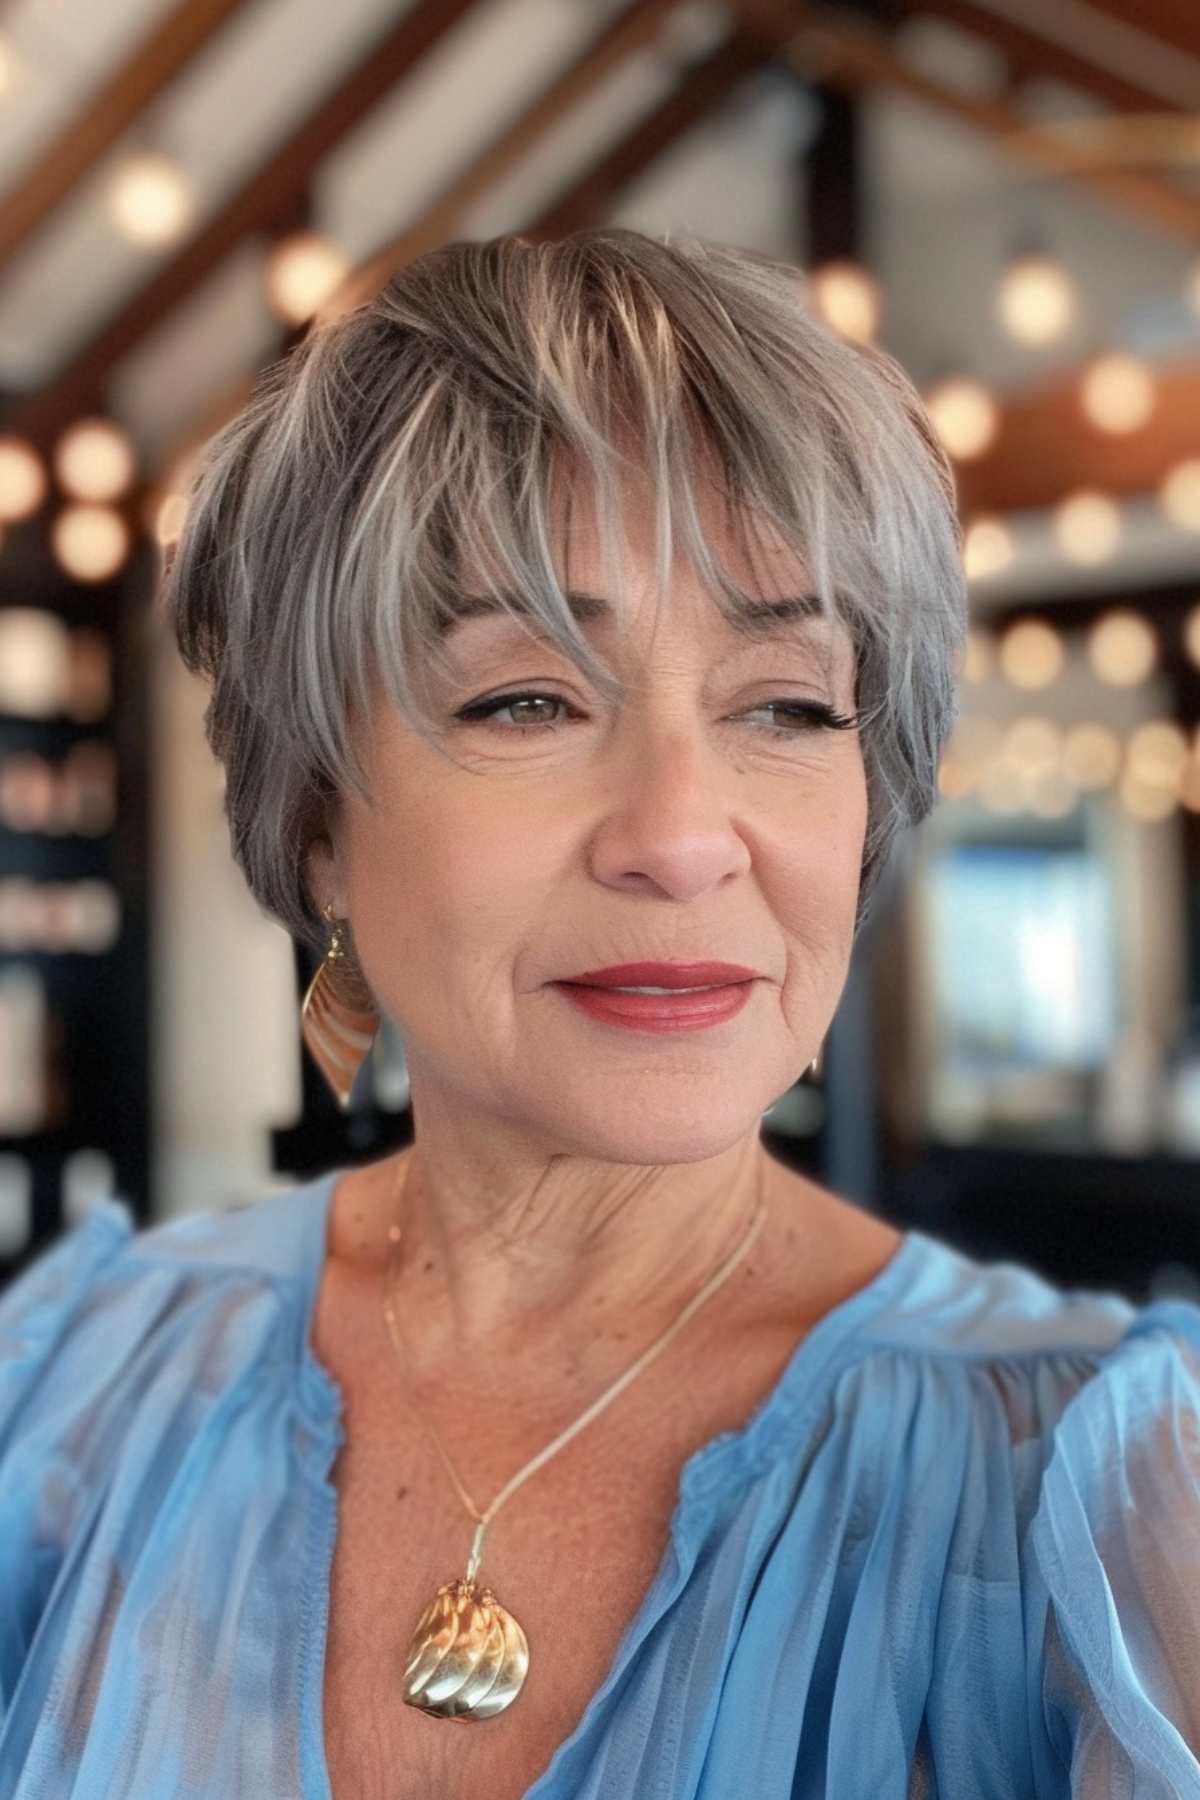 Mature woman with short, layered grey hair and easy wash-and-wear bangs, wearing a light blue blouse.